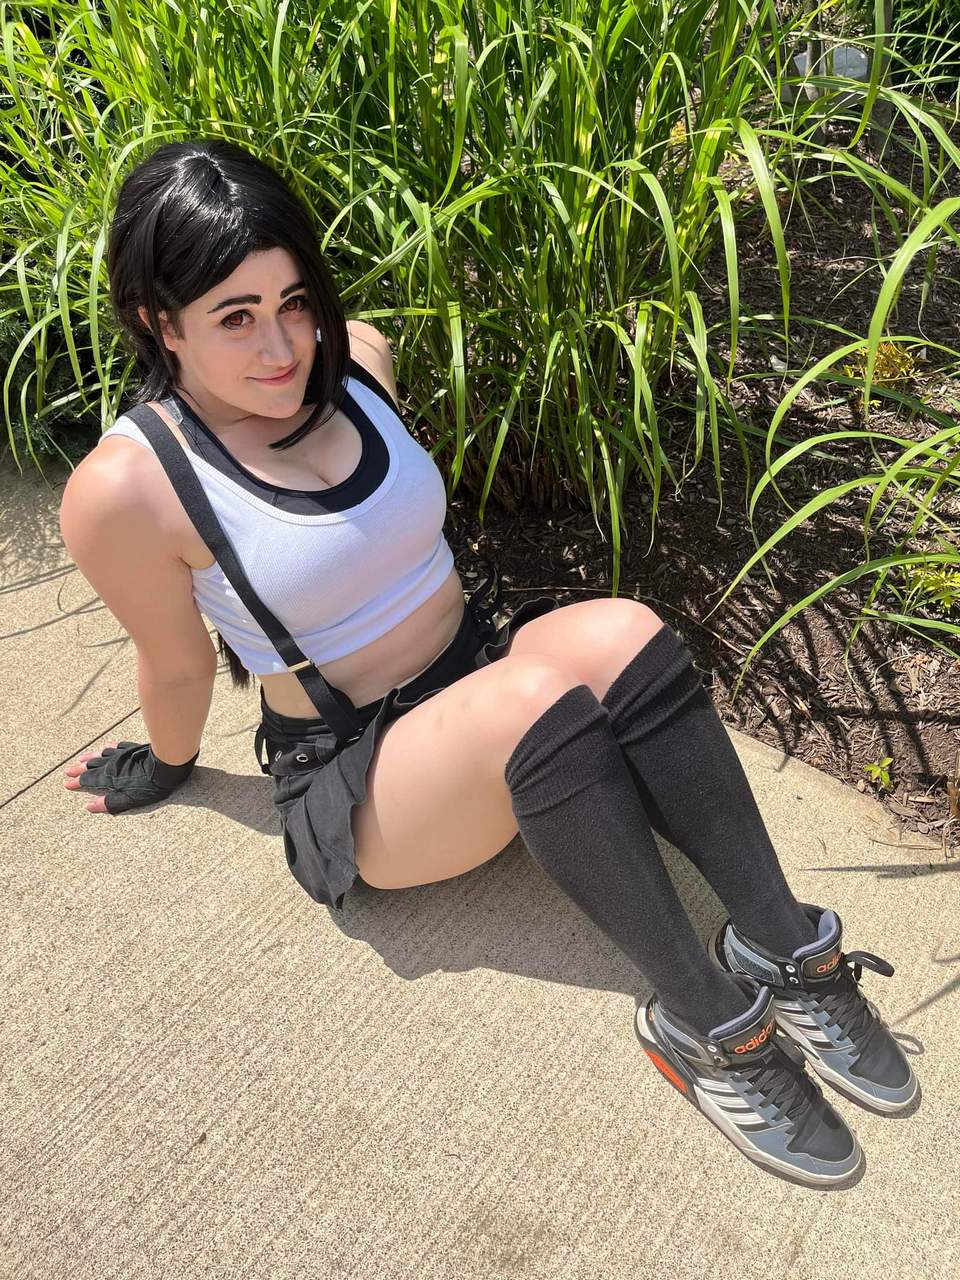 Threw Together A Quick Tifa Cosplay For A Con My First Time Wearing Contact